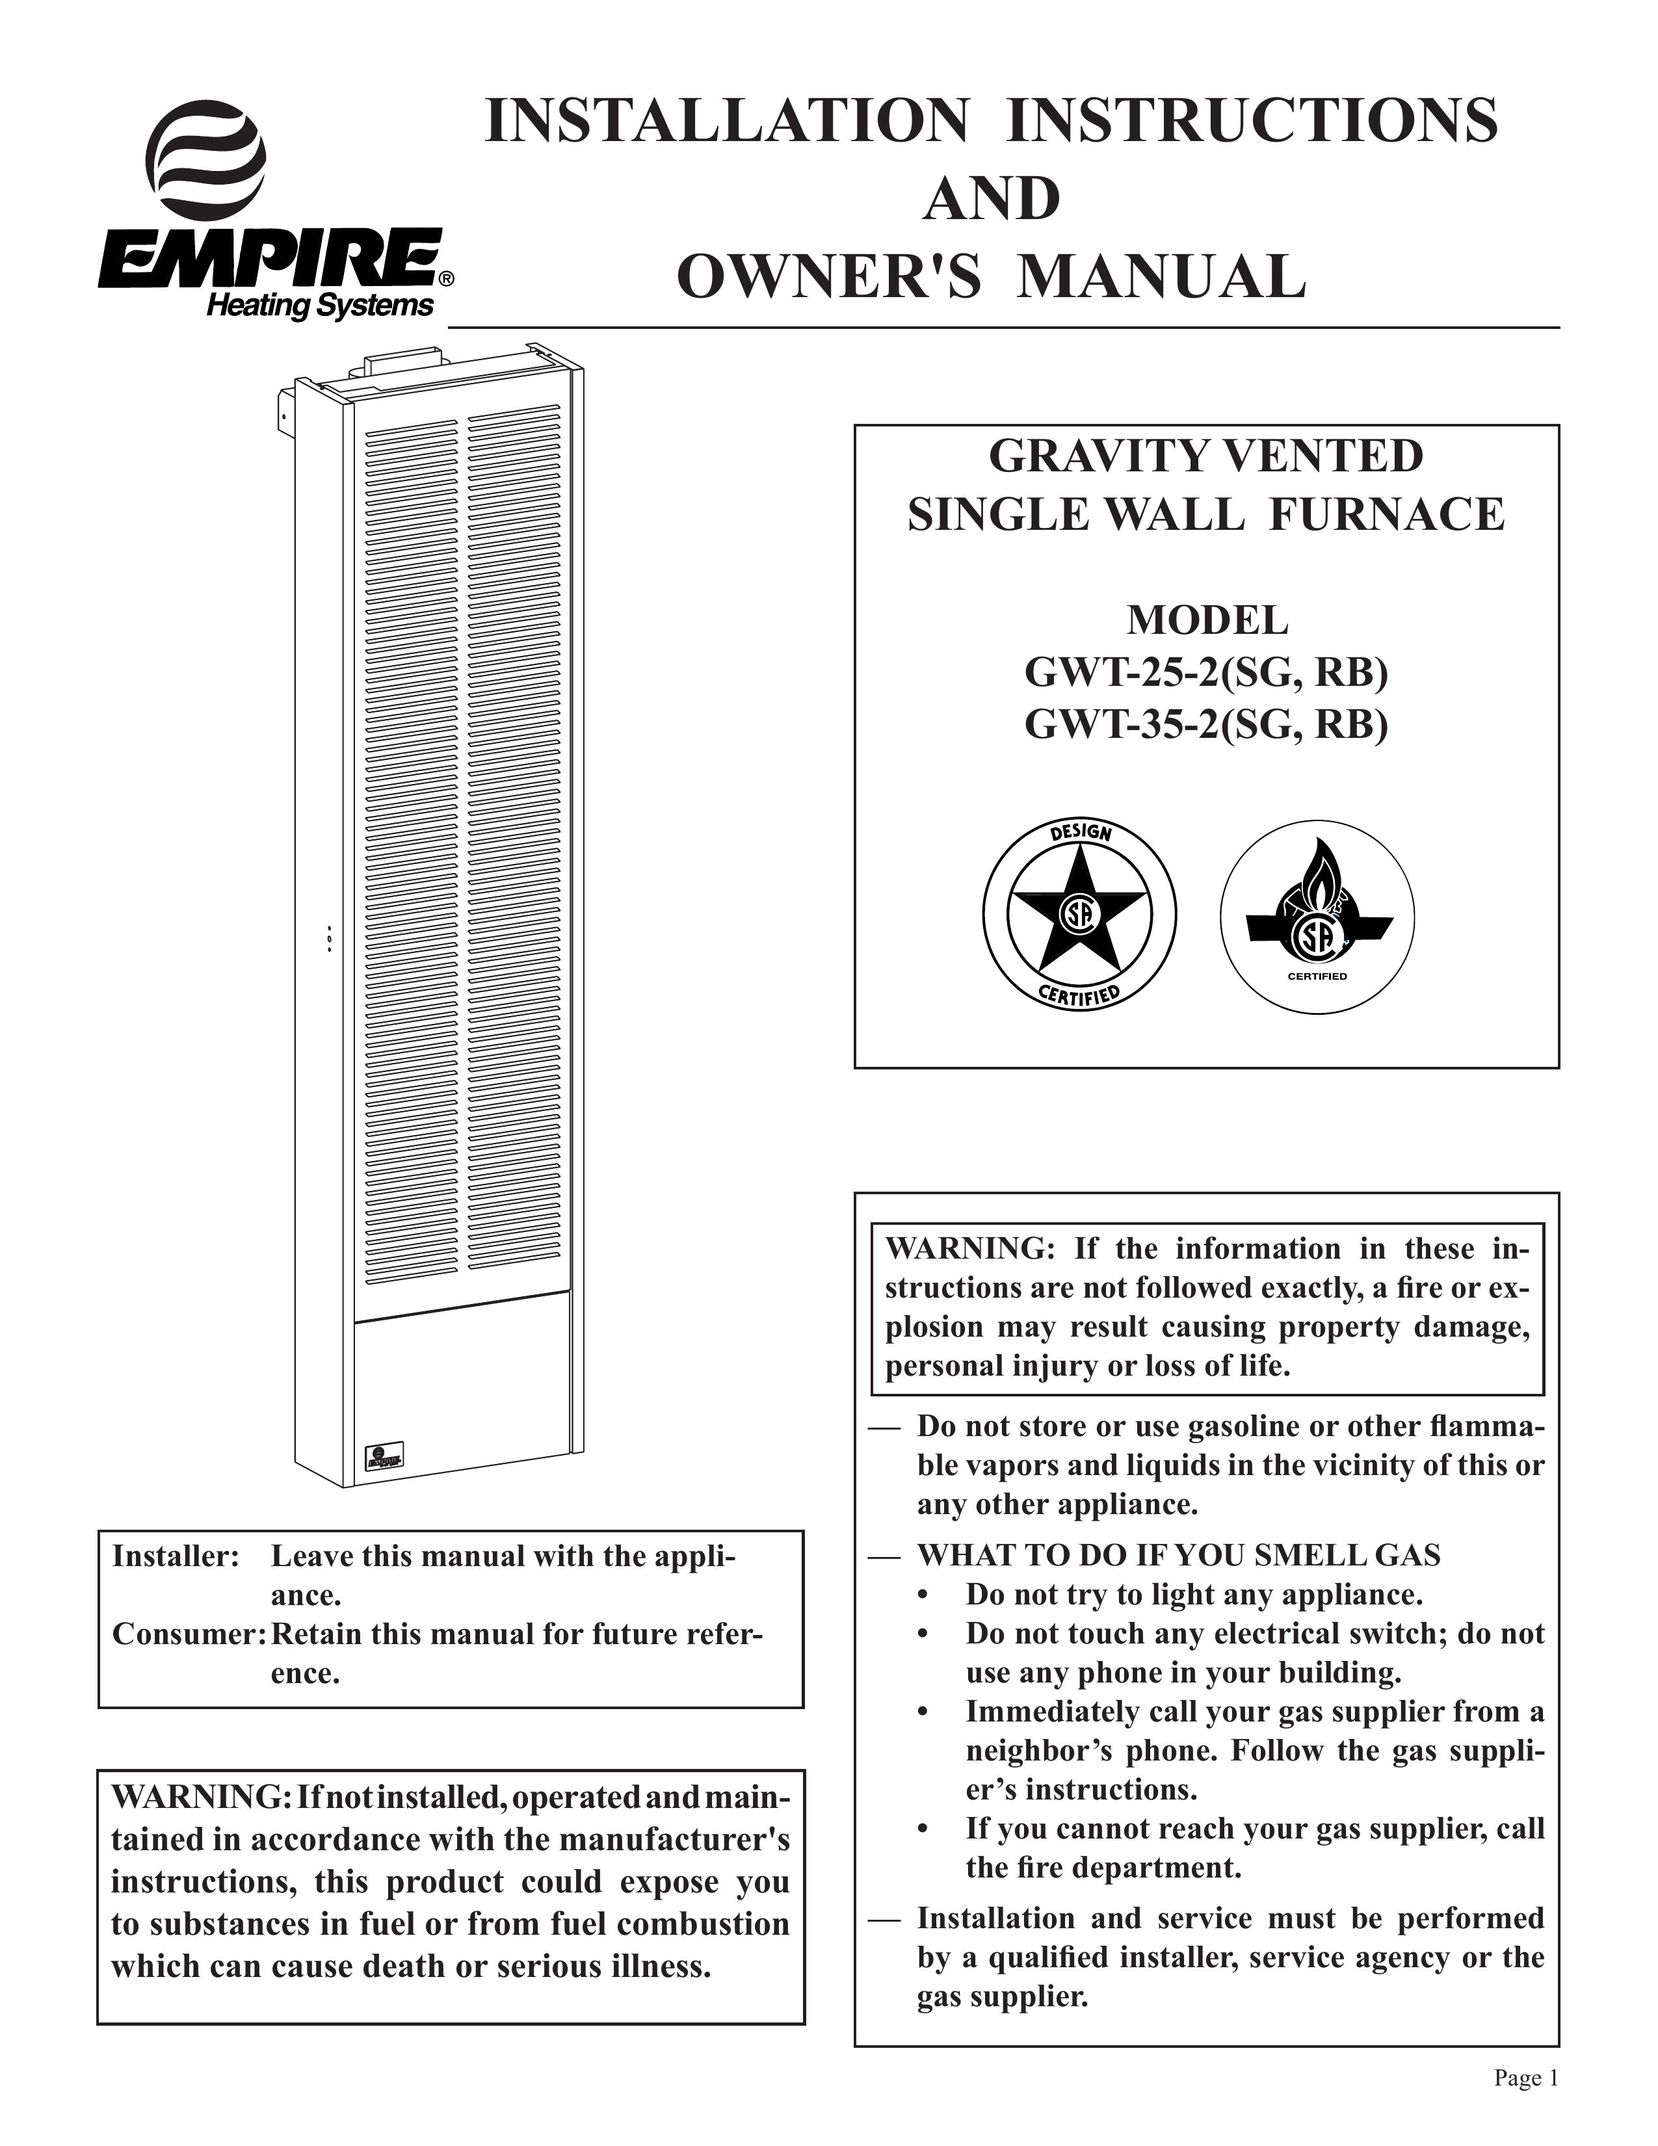 Empire Products GWT-25-2(SG Furnace User Manual